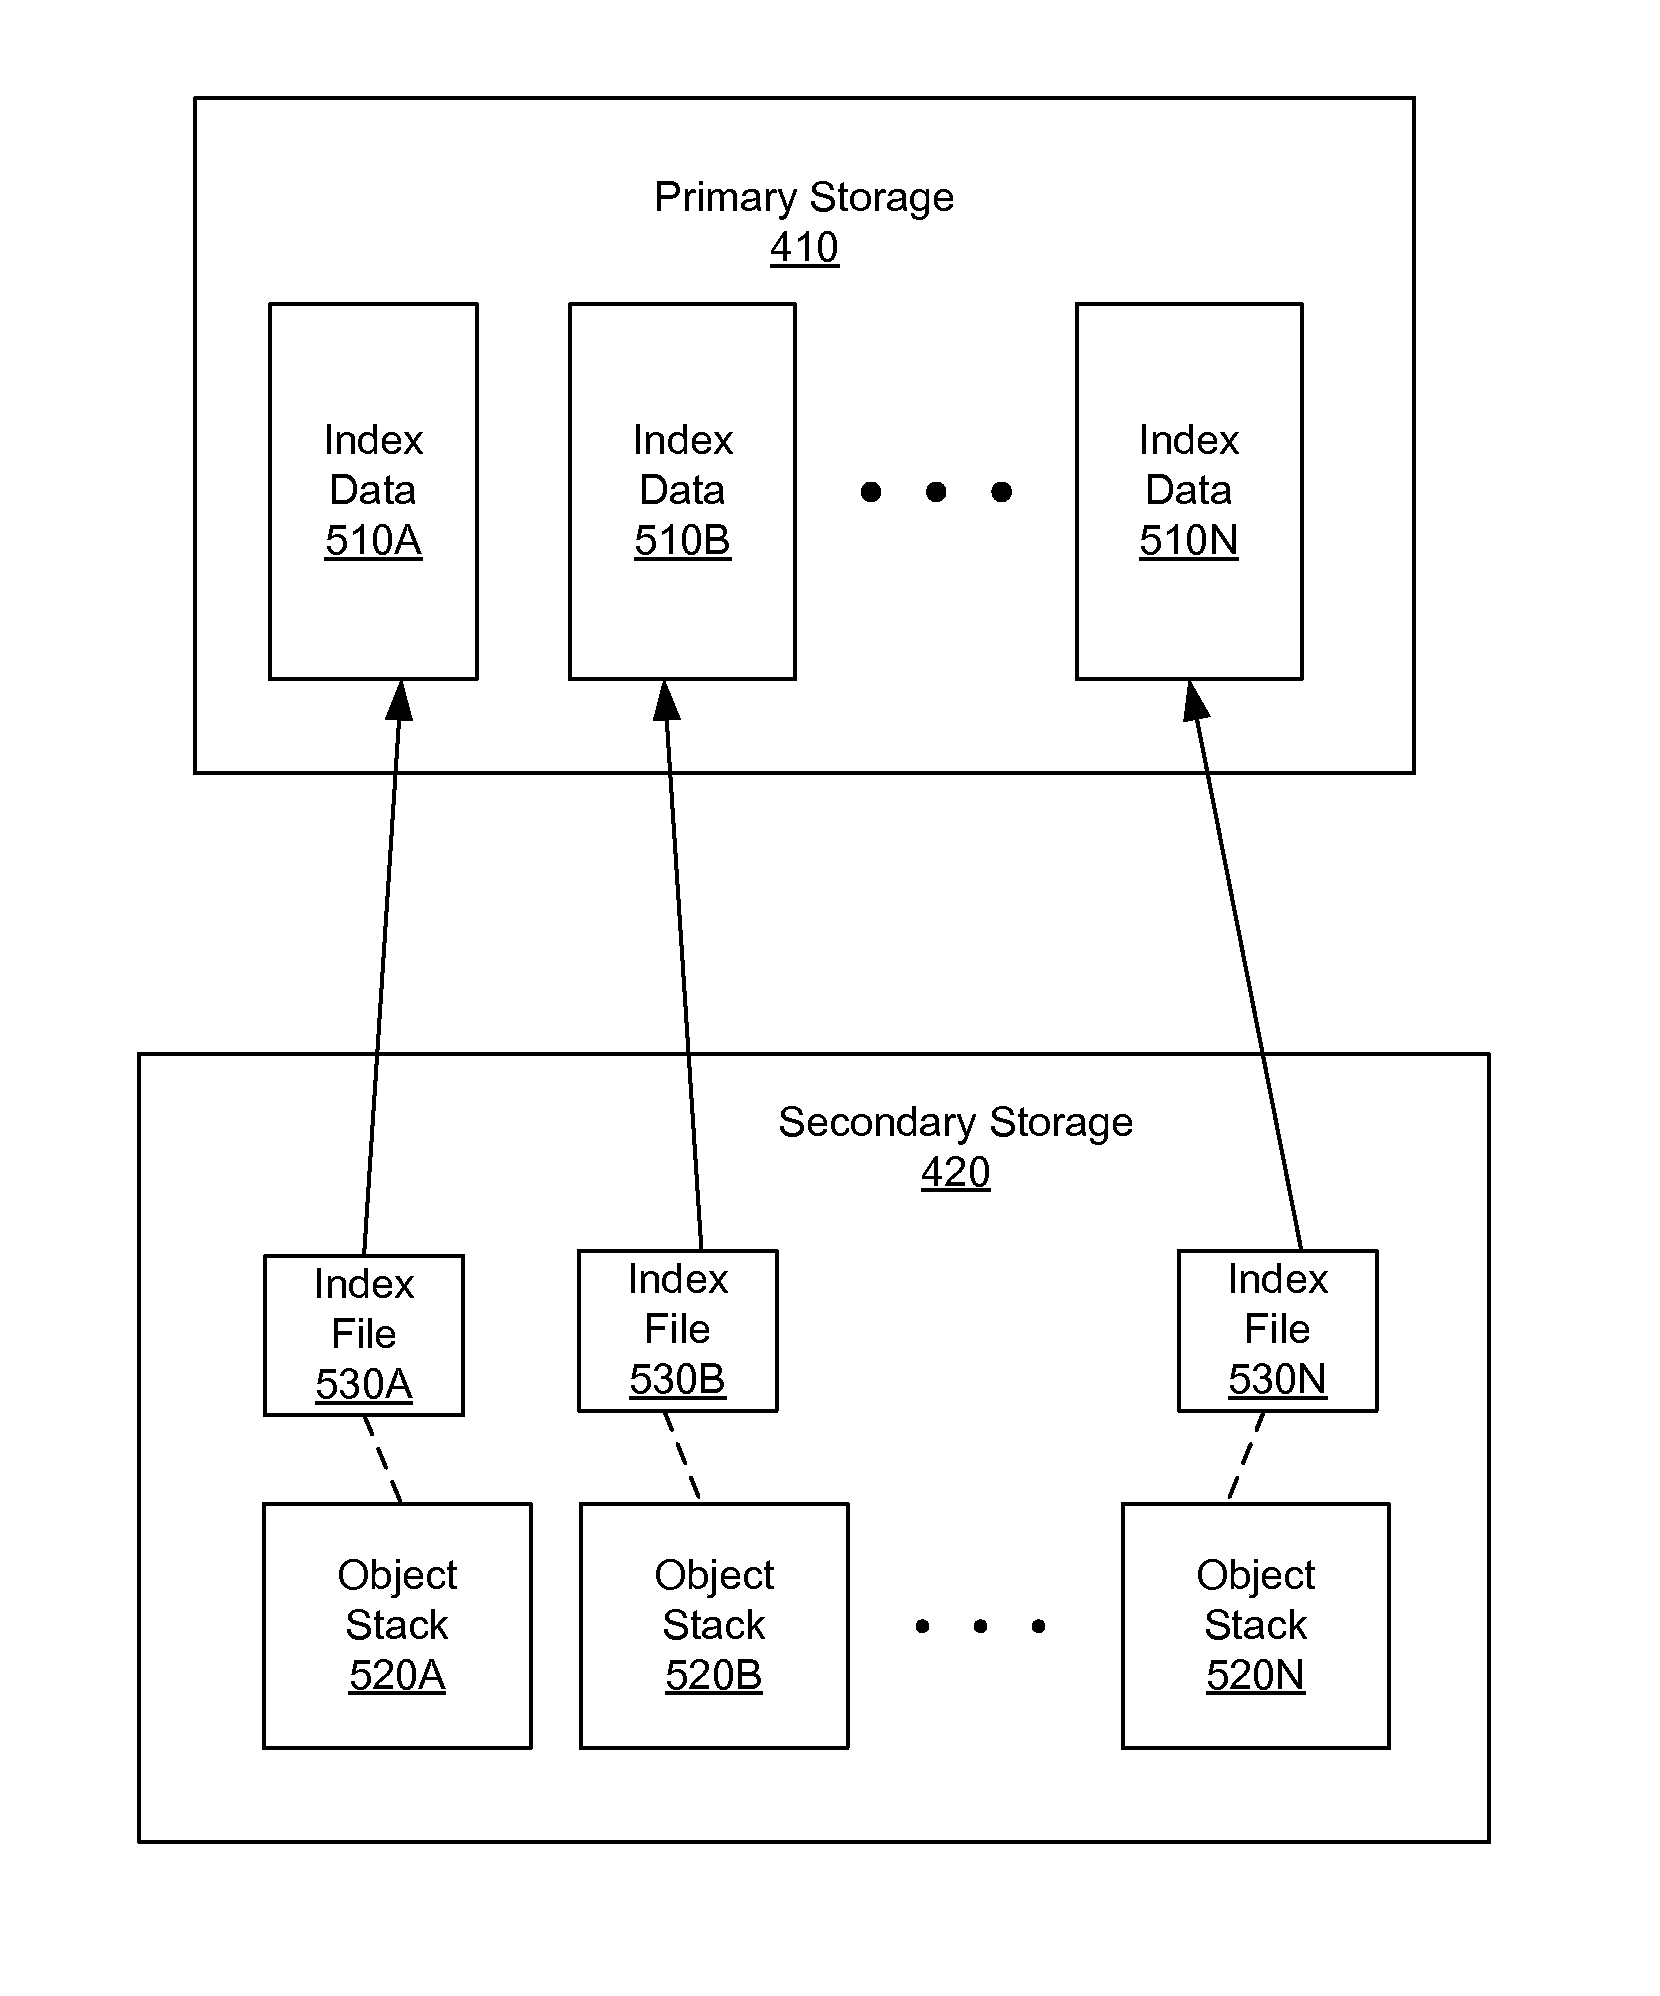 Efficient storage and retrieval for large number of data objects